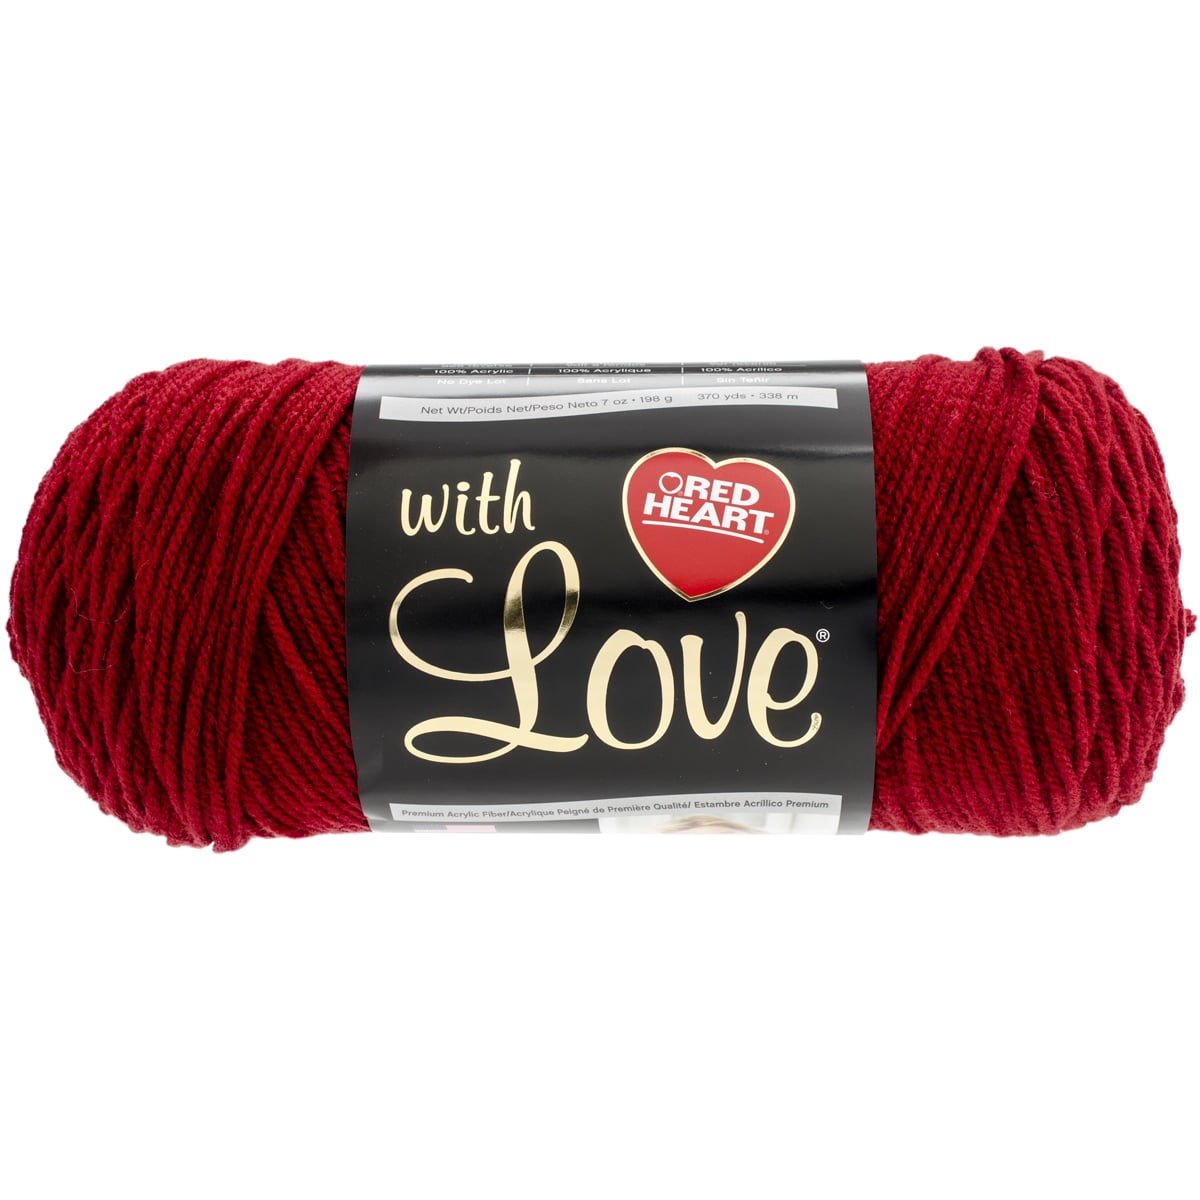 Red Heart With Love Yarn-White -E400-1001 Lot Of 2 Skein